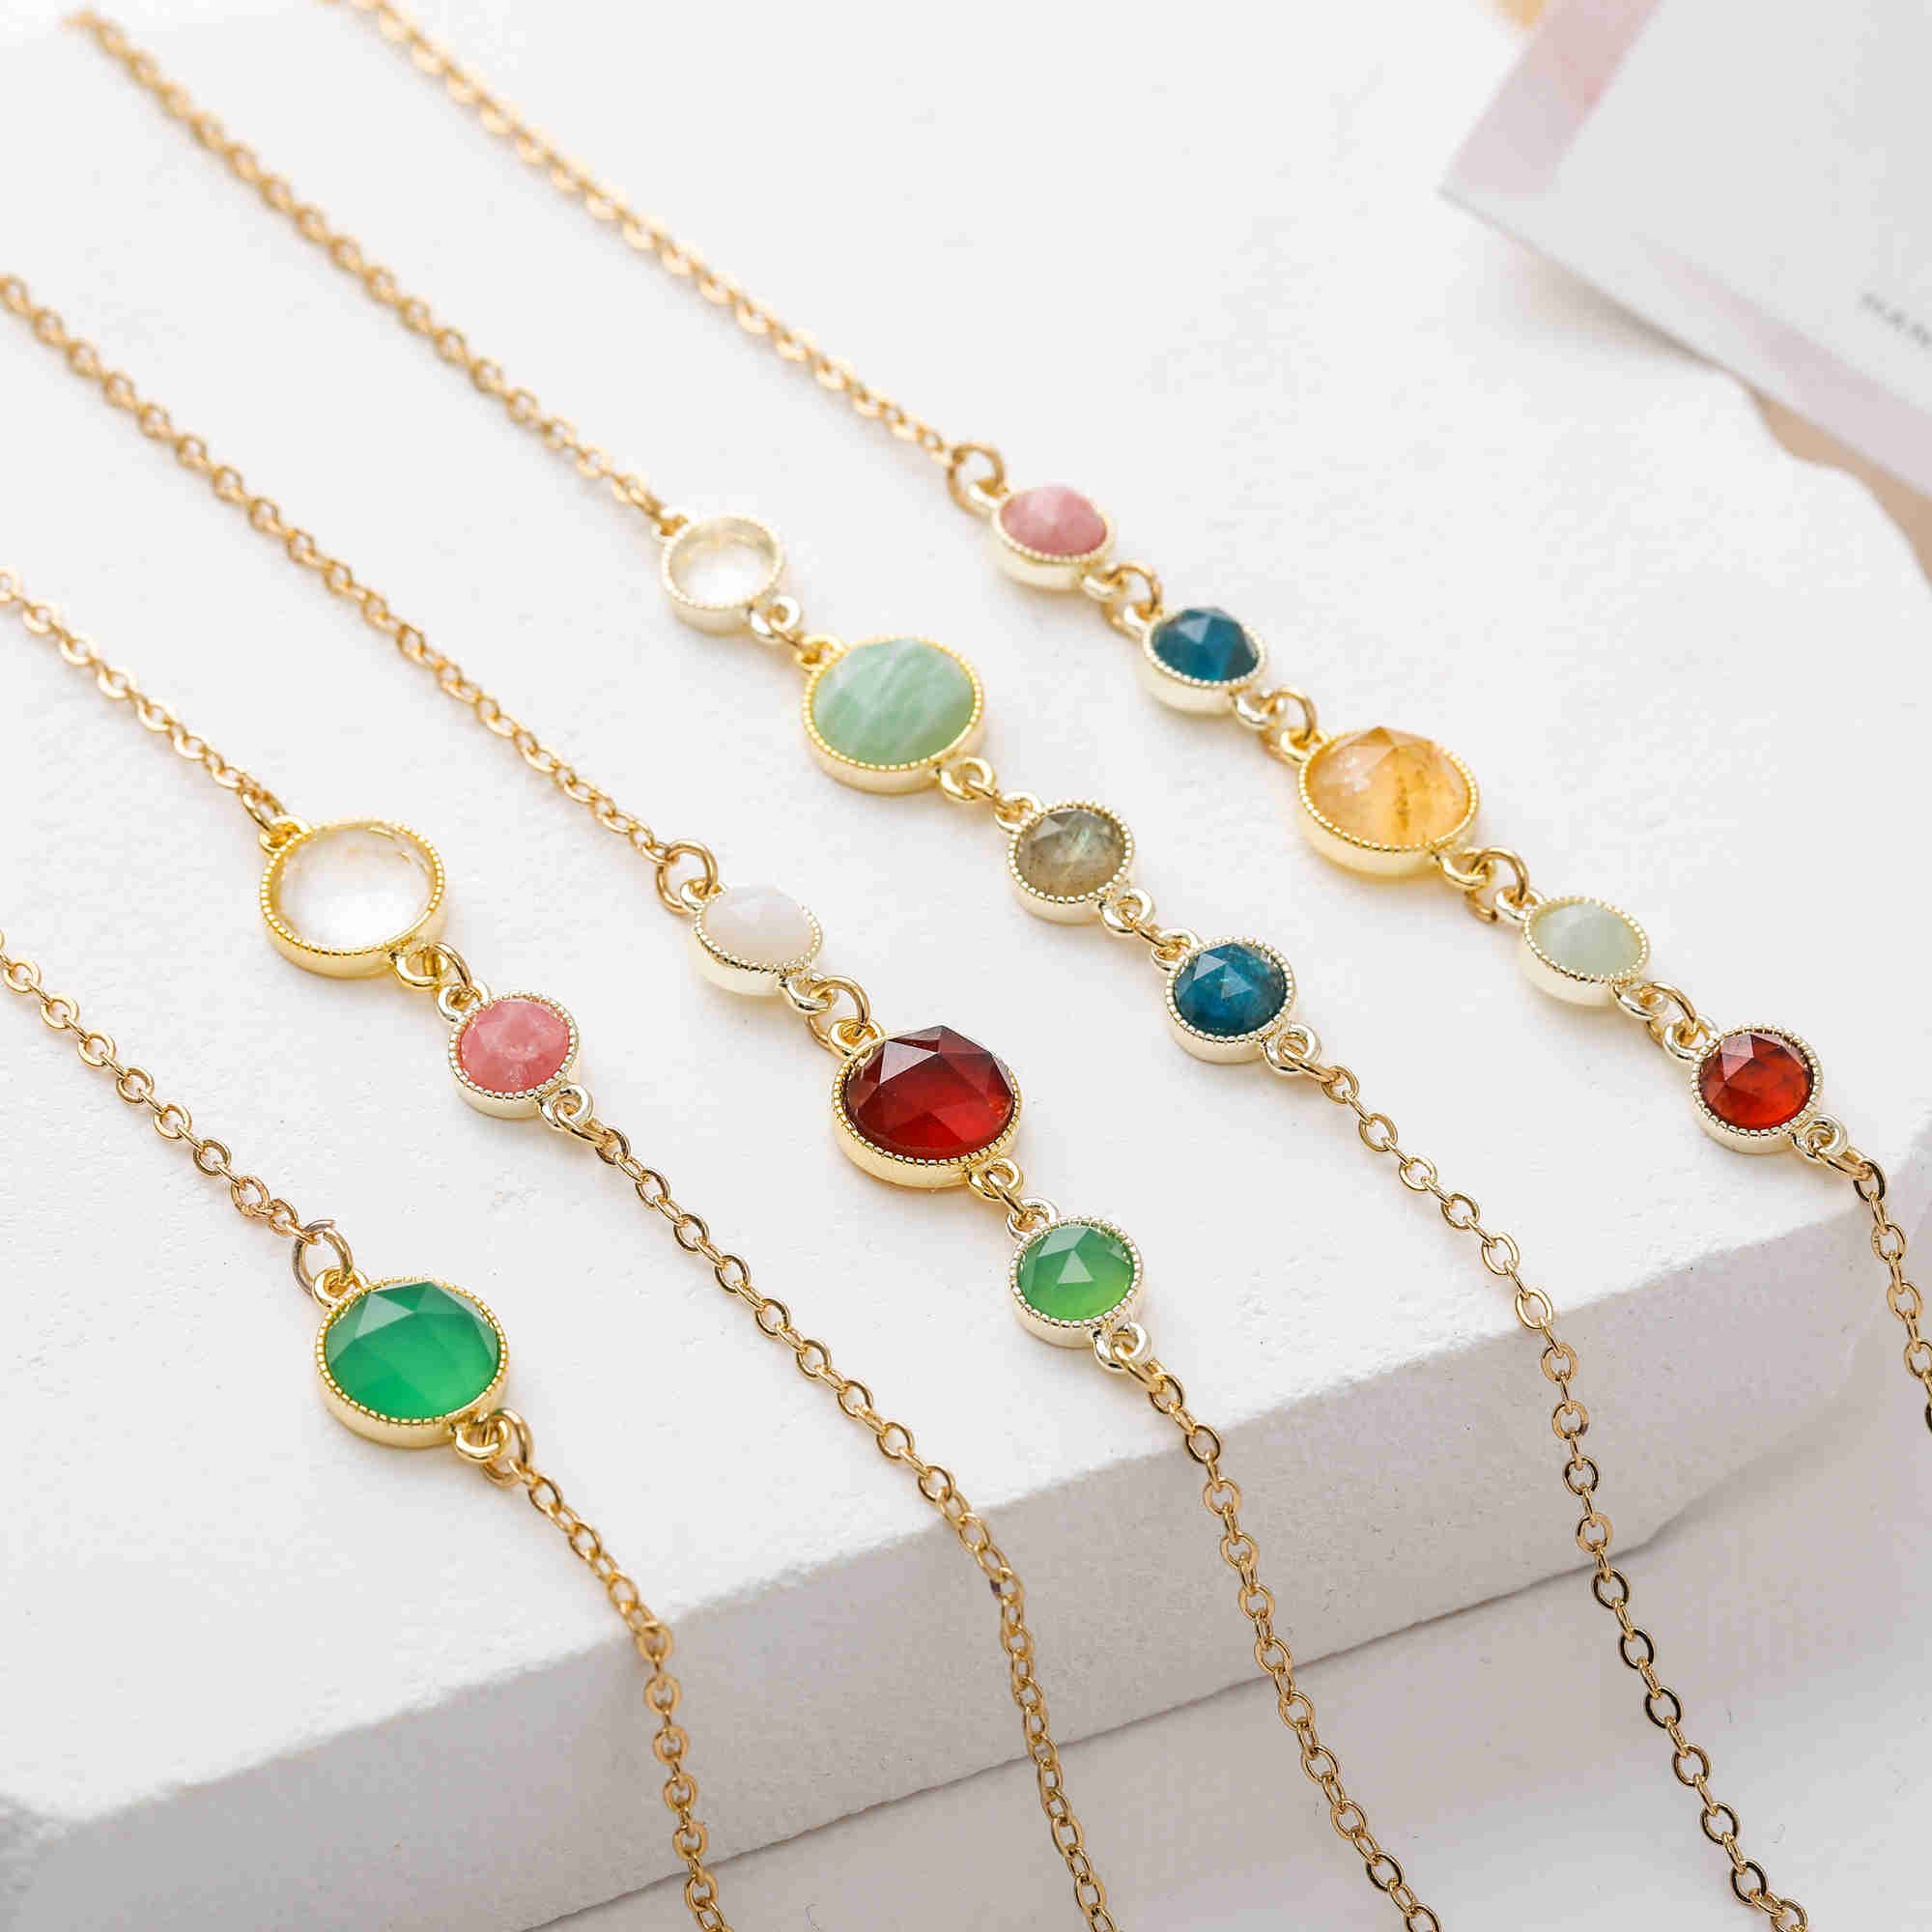 16" Round Multi Faceted Gemstone Necklace, Gold Plated Bezel, Healing Crystal Necklace, Birthstone Necklace, Wholesale Jewelry BT022